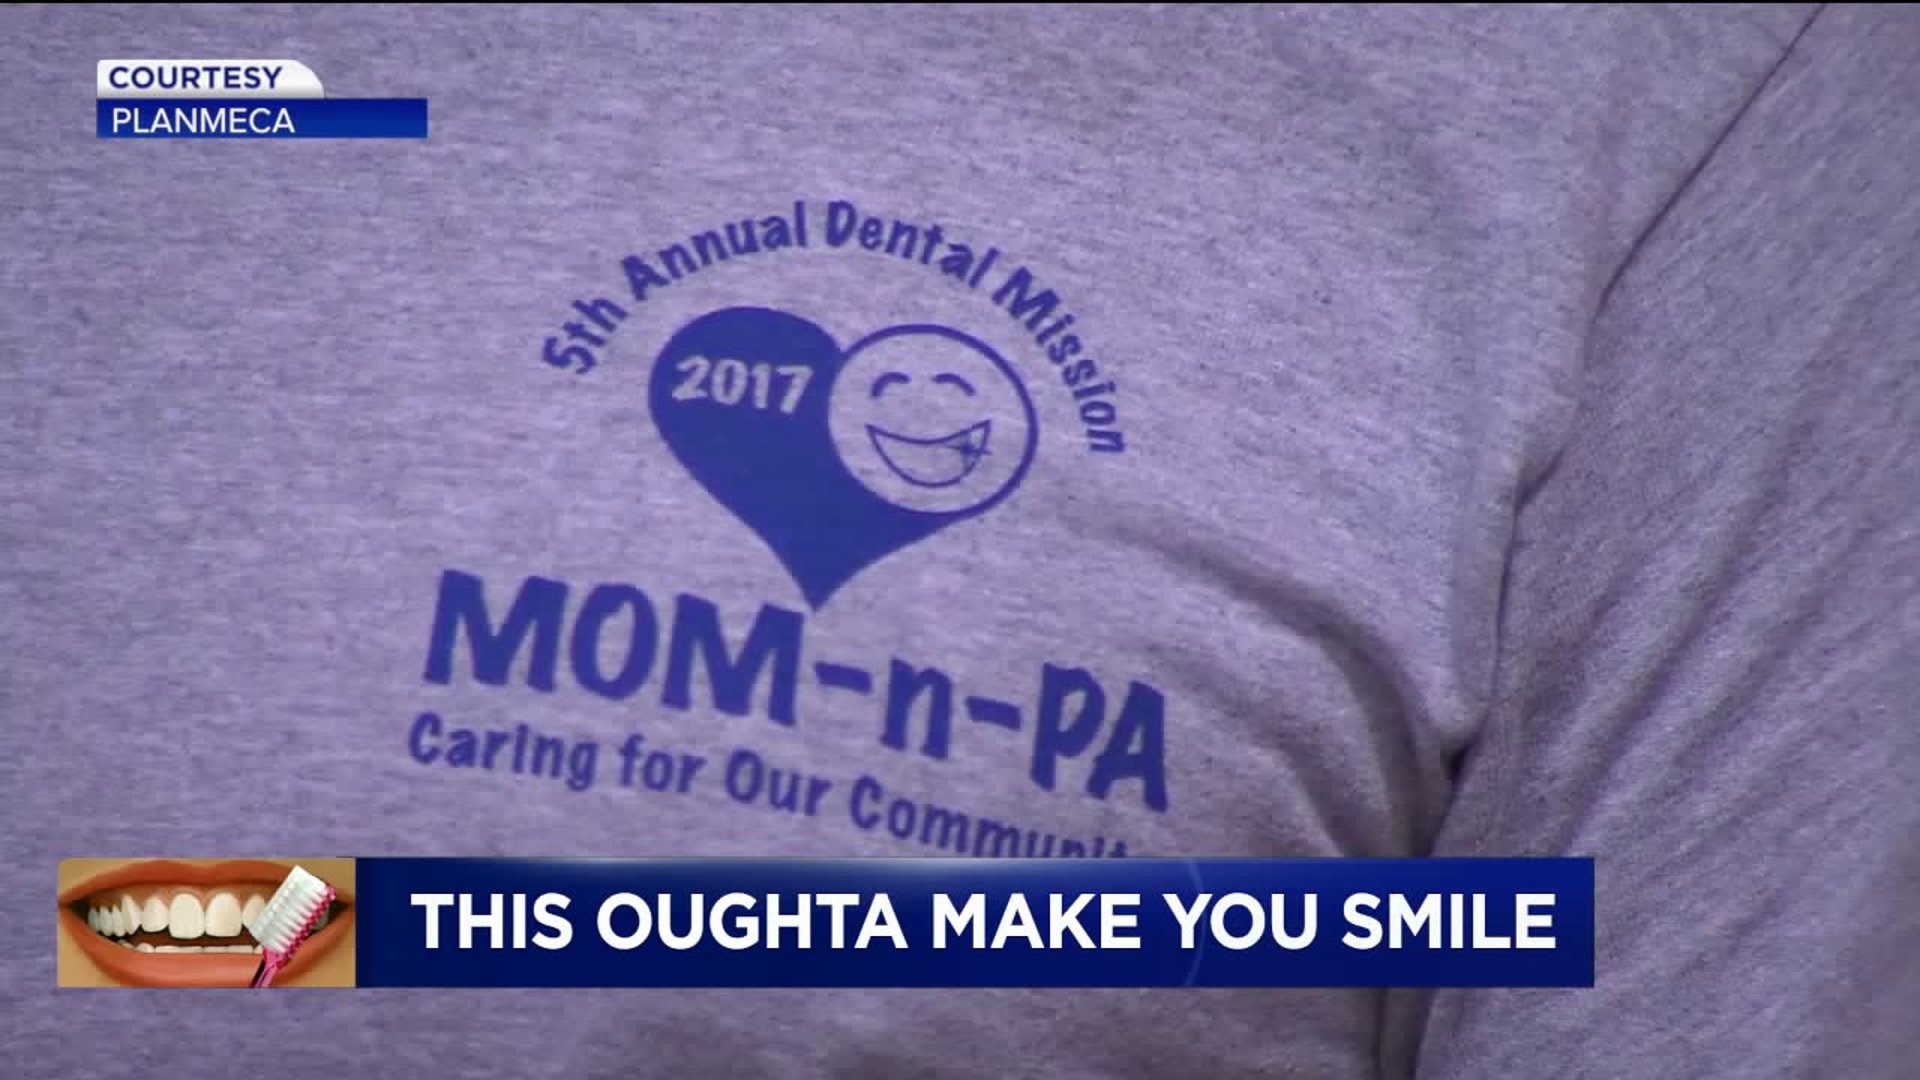 Massive Event to Provide Free Dental Services to Thousands near Wilkes-Barre